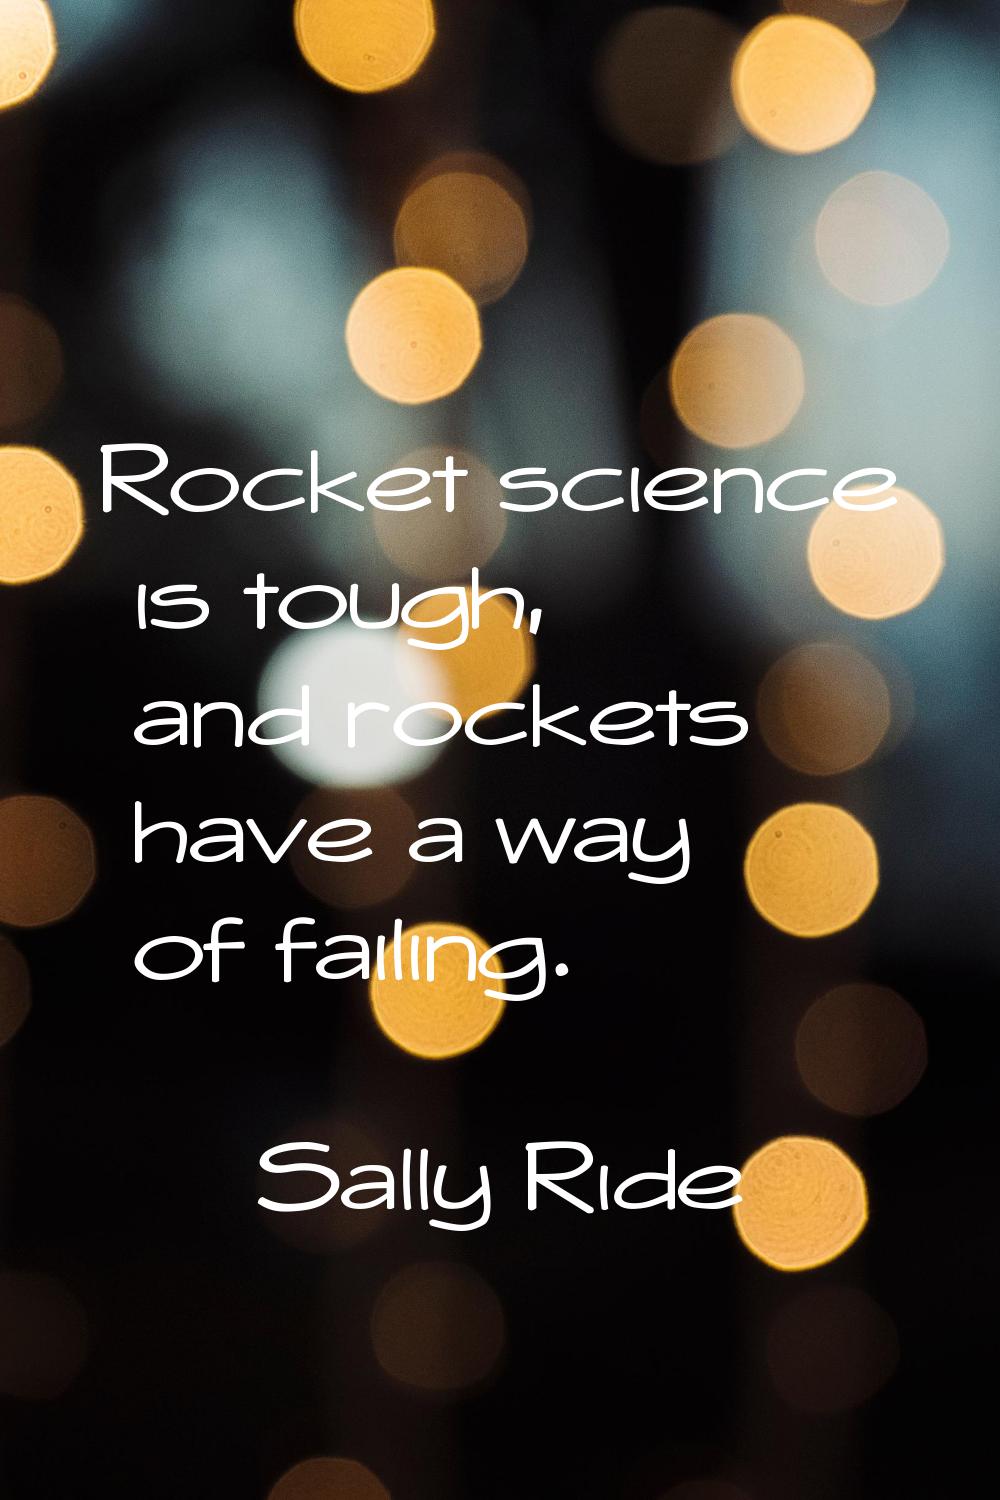 Rocket science is tough, and rockets have a way of failing.